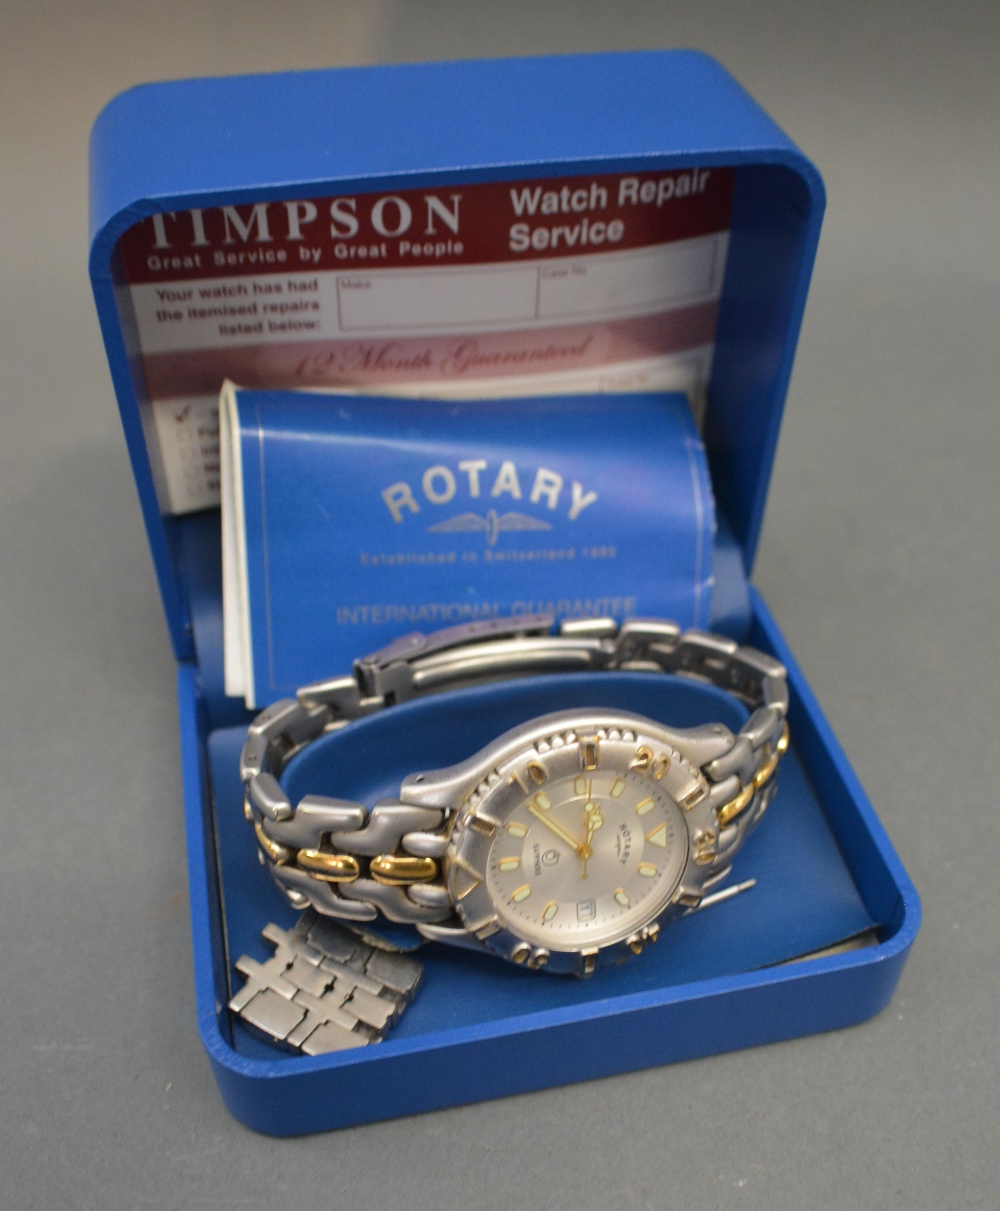 A Rotary Stainless Steel Cased Gentleman's Wrist Watch with original box